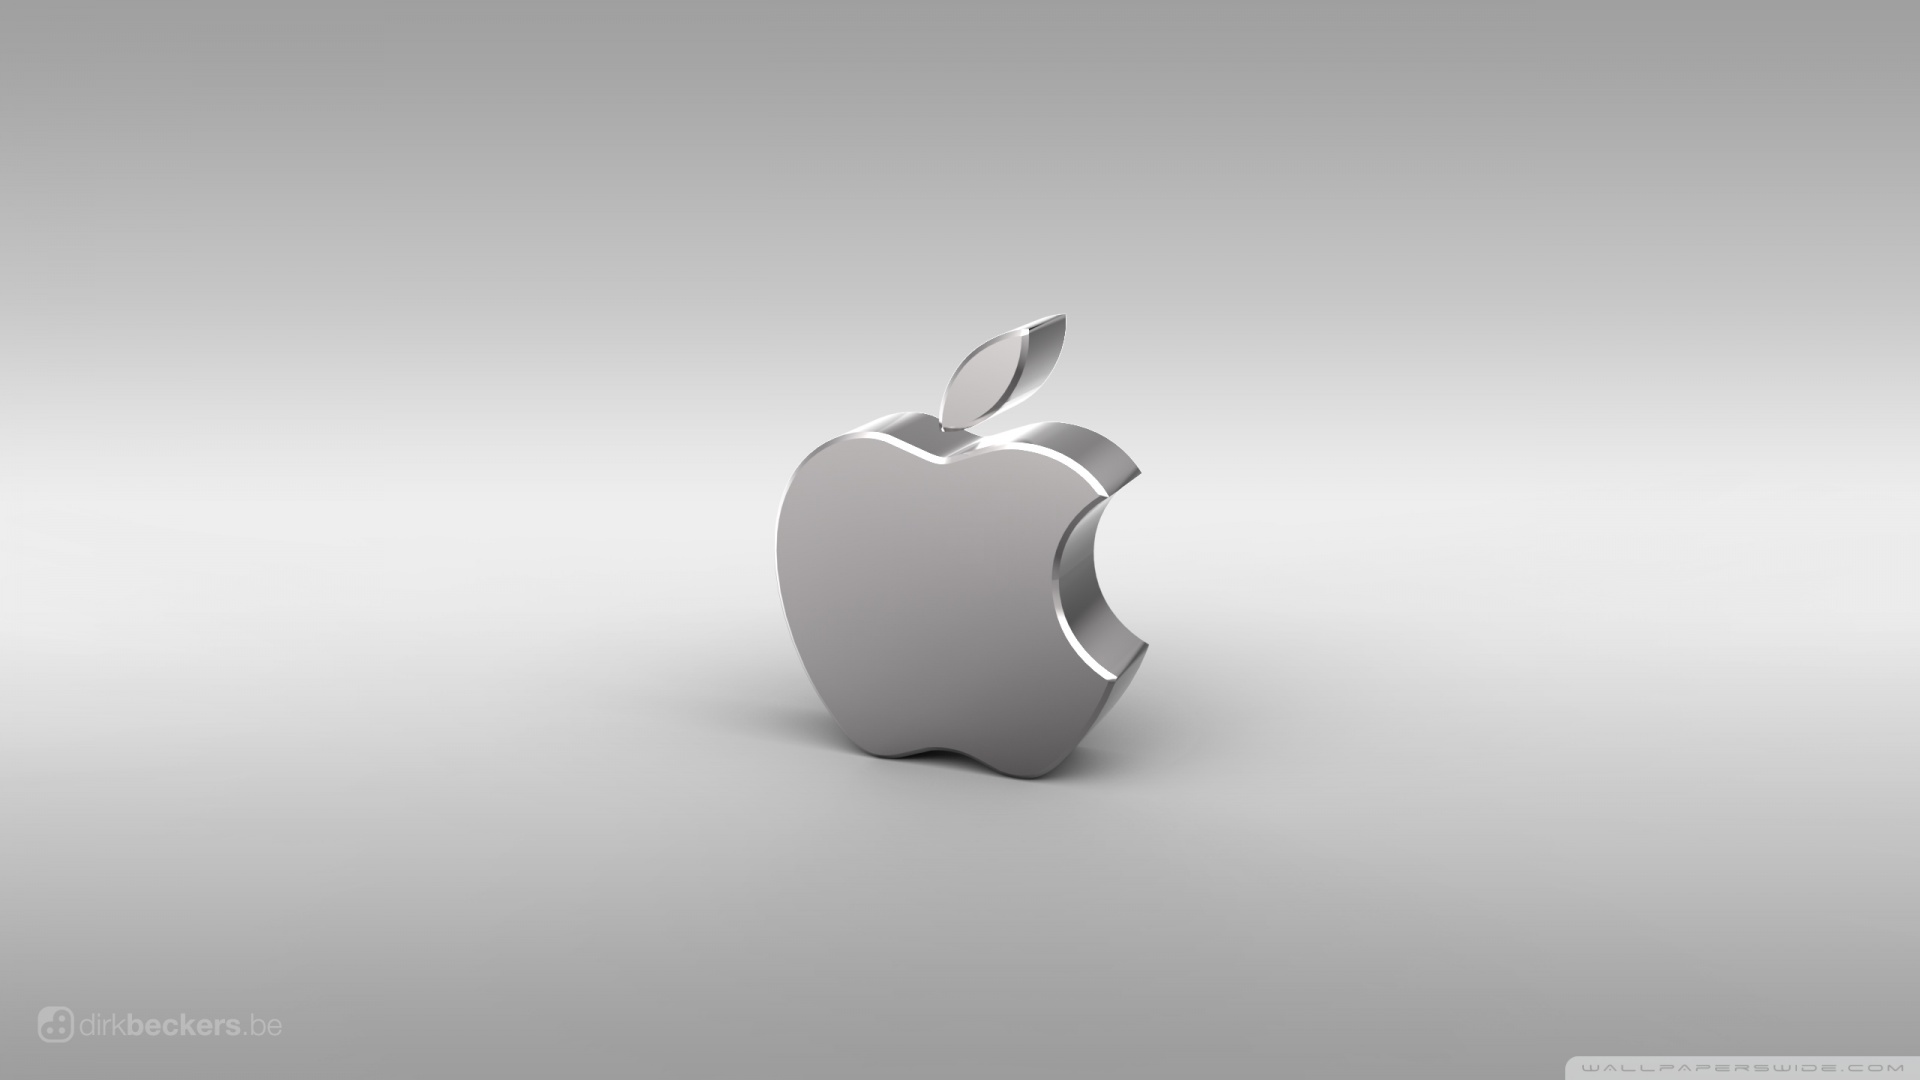 Wallpapers Mac Os Hd Collection Exclusive 1920x1080 #mac os